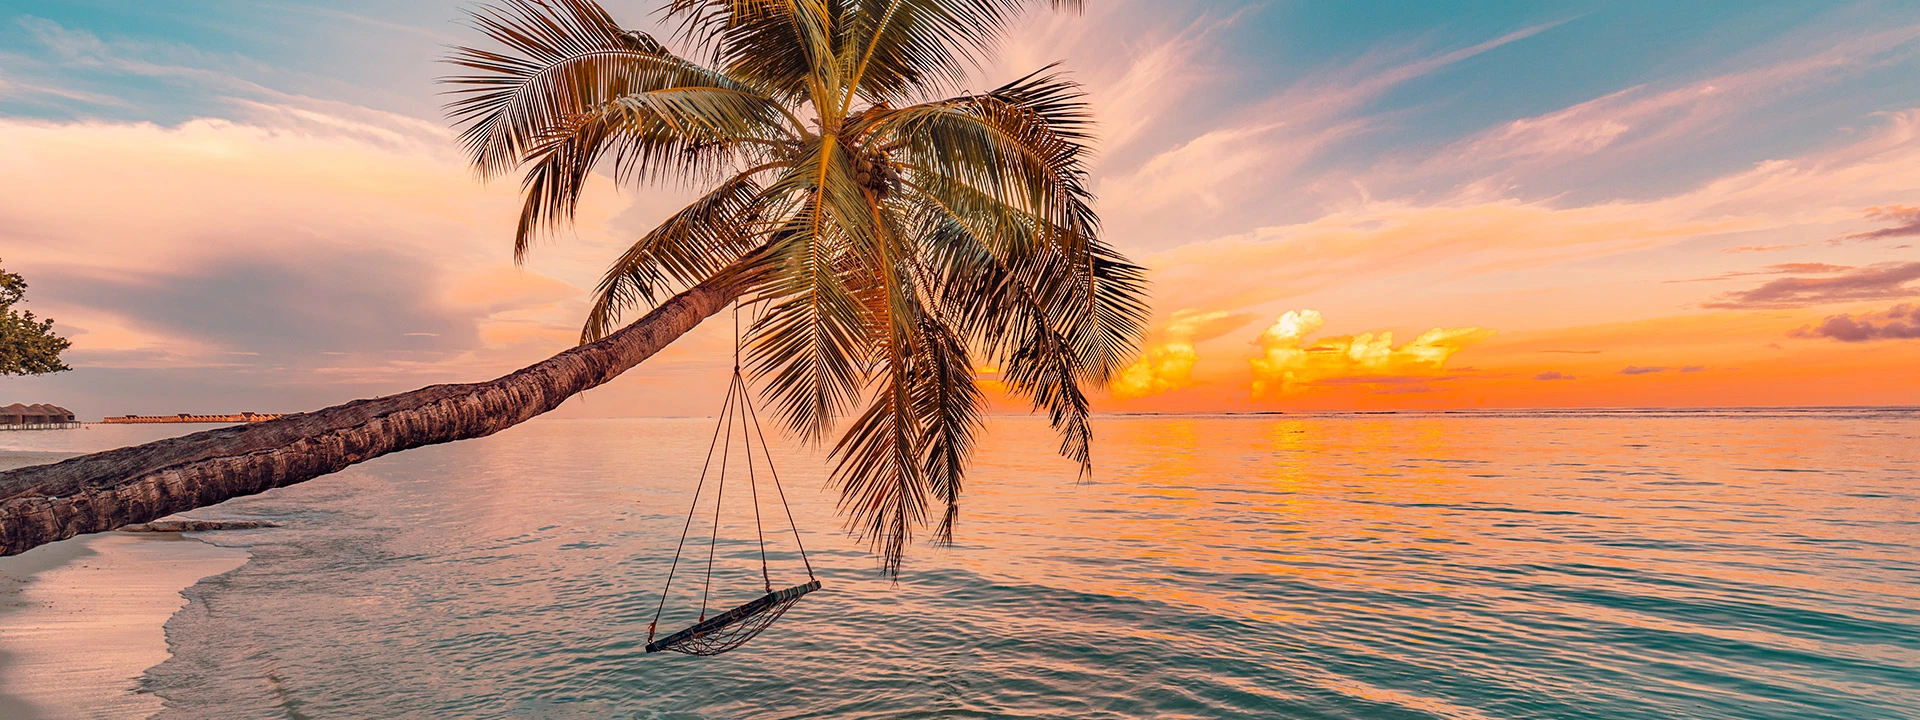 palm trees and beaches at sunset during a Caribbean cruise